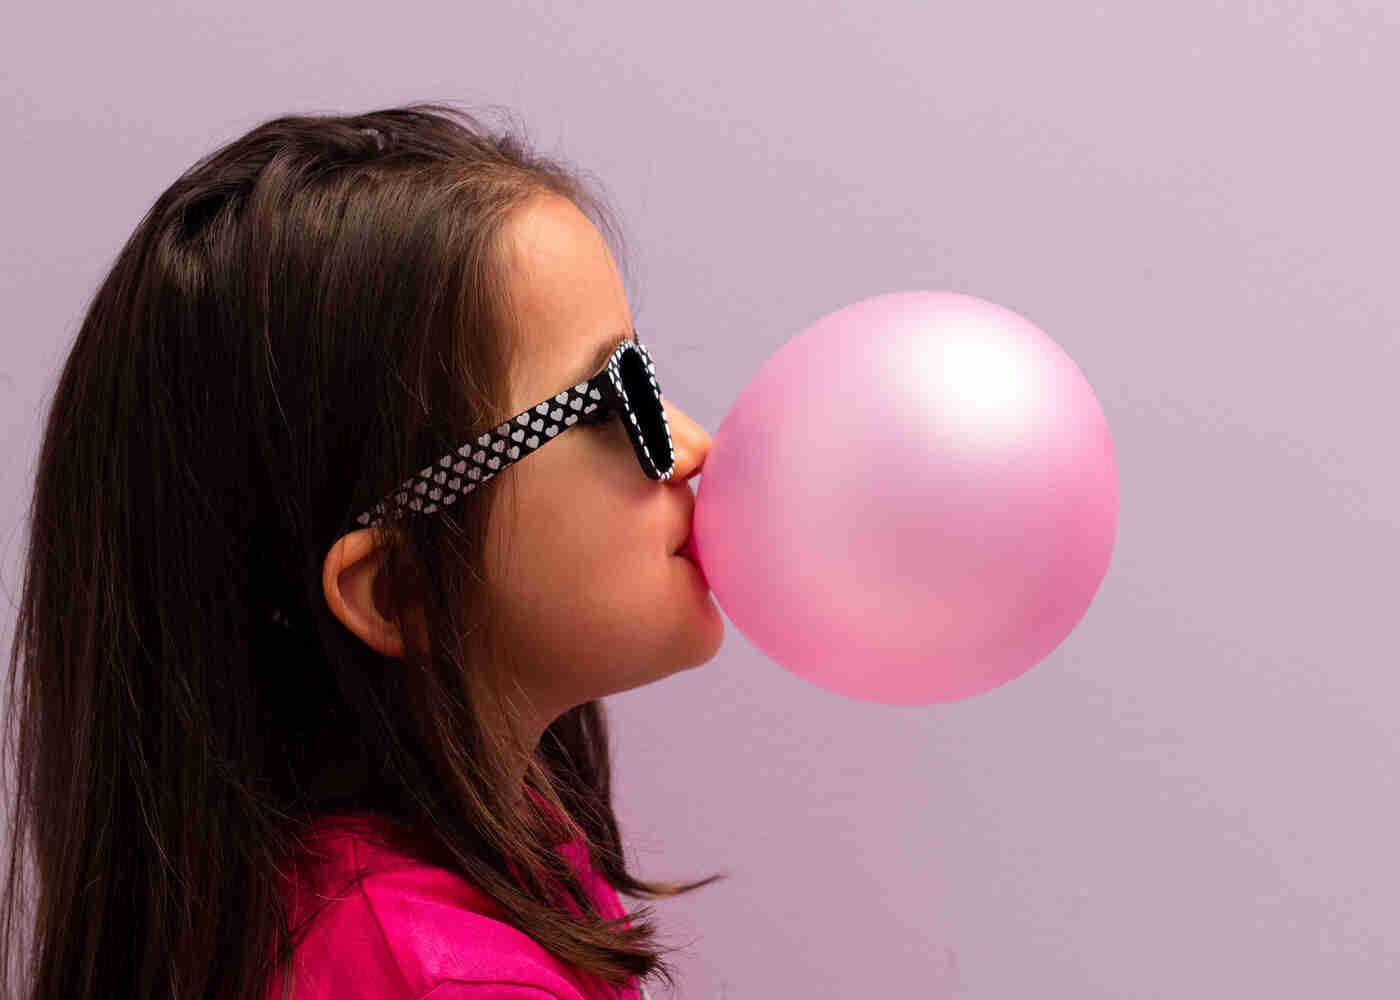 Pretty young girl with sunglasses on blowing a bubble gum bubble